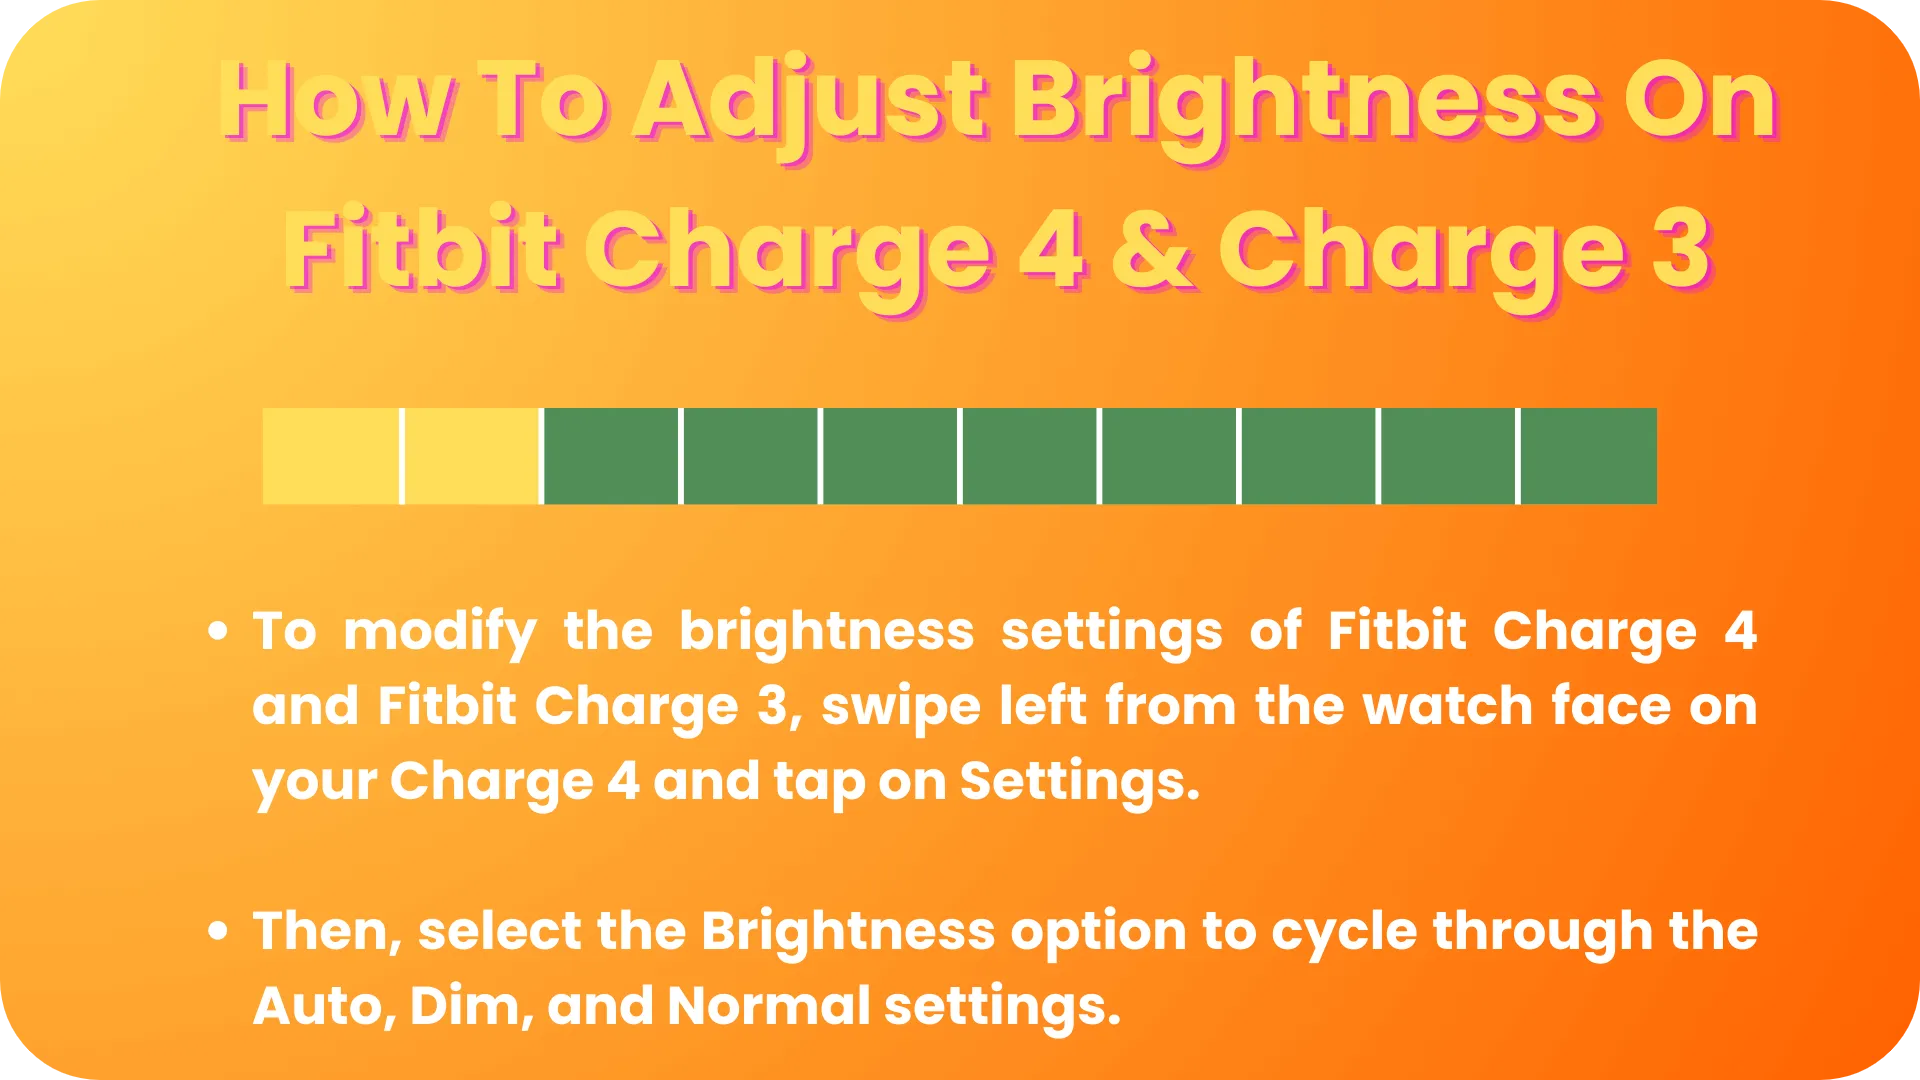 How To Adjust Brightness on Fitbit Charge 4 & Charge 3